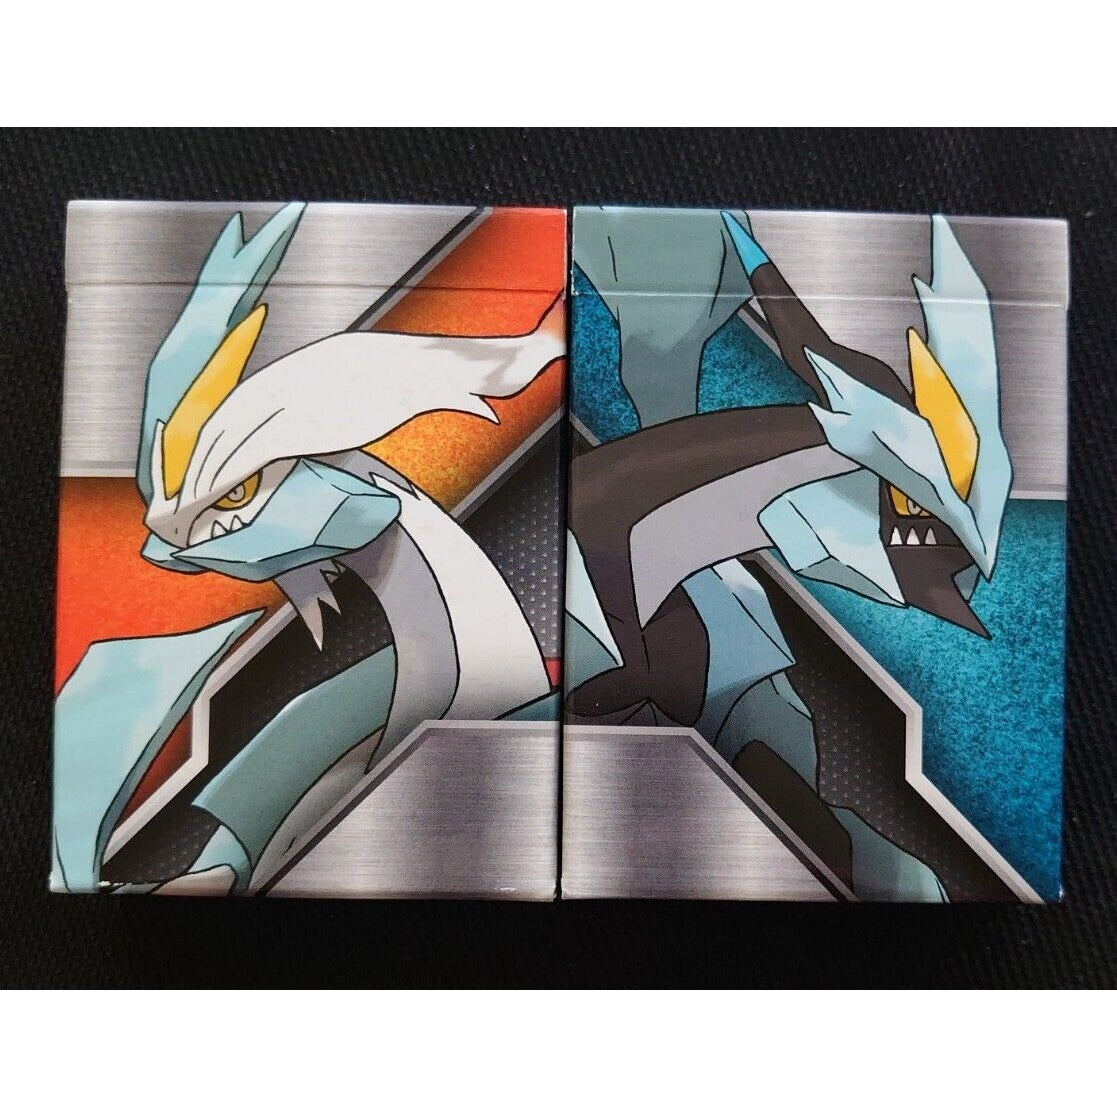 Black White Kyurem Battle Arena Deck Boxes Only WILL BE FILLED WITH RANDOM BULK